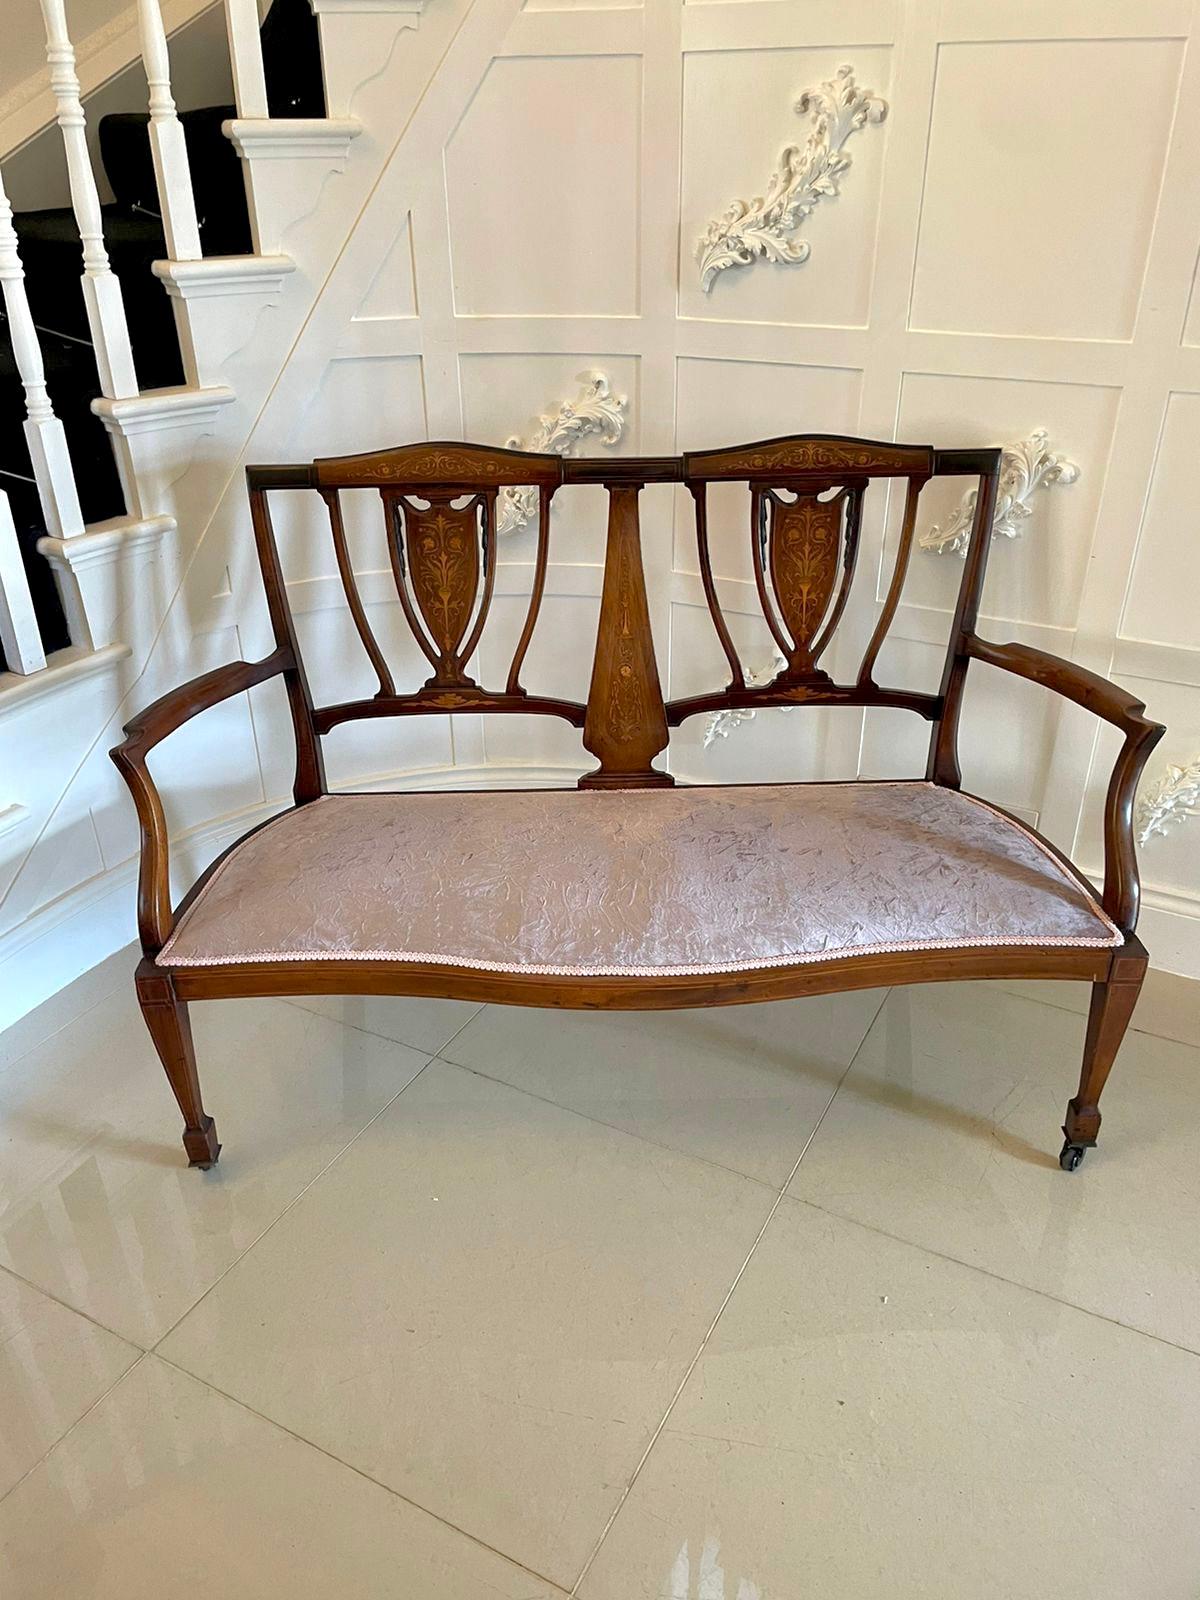 Antique Edwardian mahogany inlaid settee sofa which has a lovely inlaid shaped top rail, lovely inlaid shaped splats, shaped open arms, newly recovered seat, standing on square tapering legs with spade feet to the front out swept back legs, original